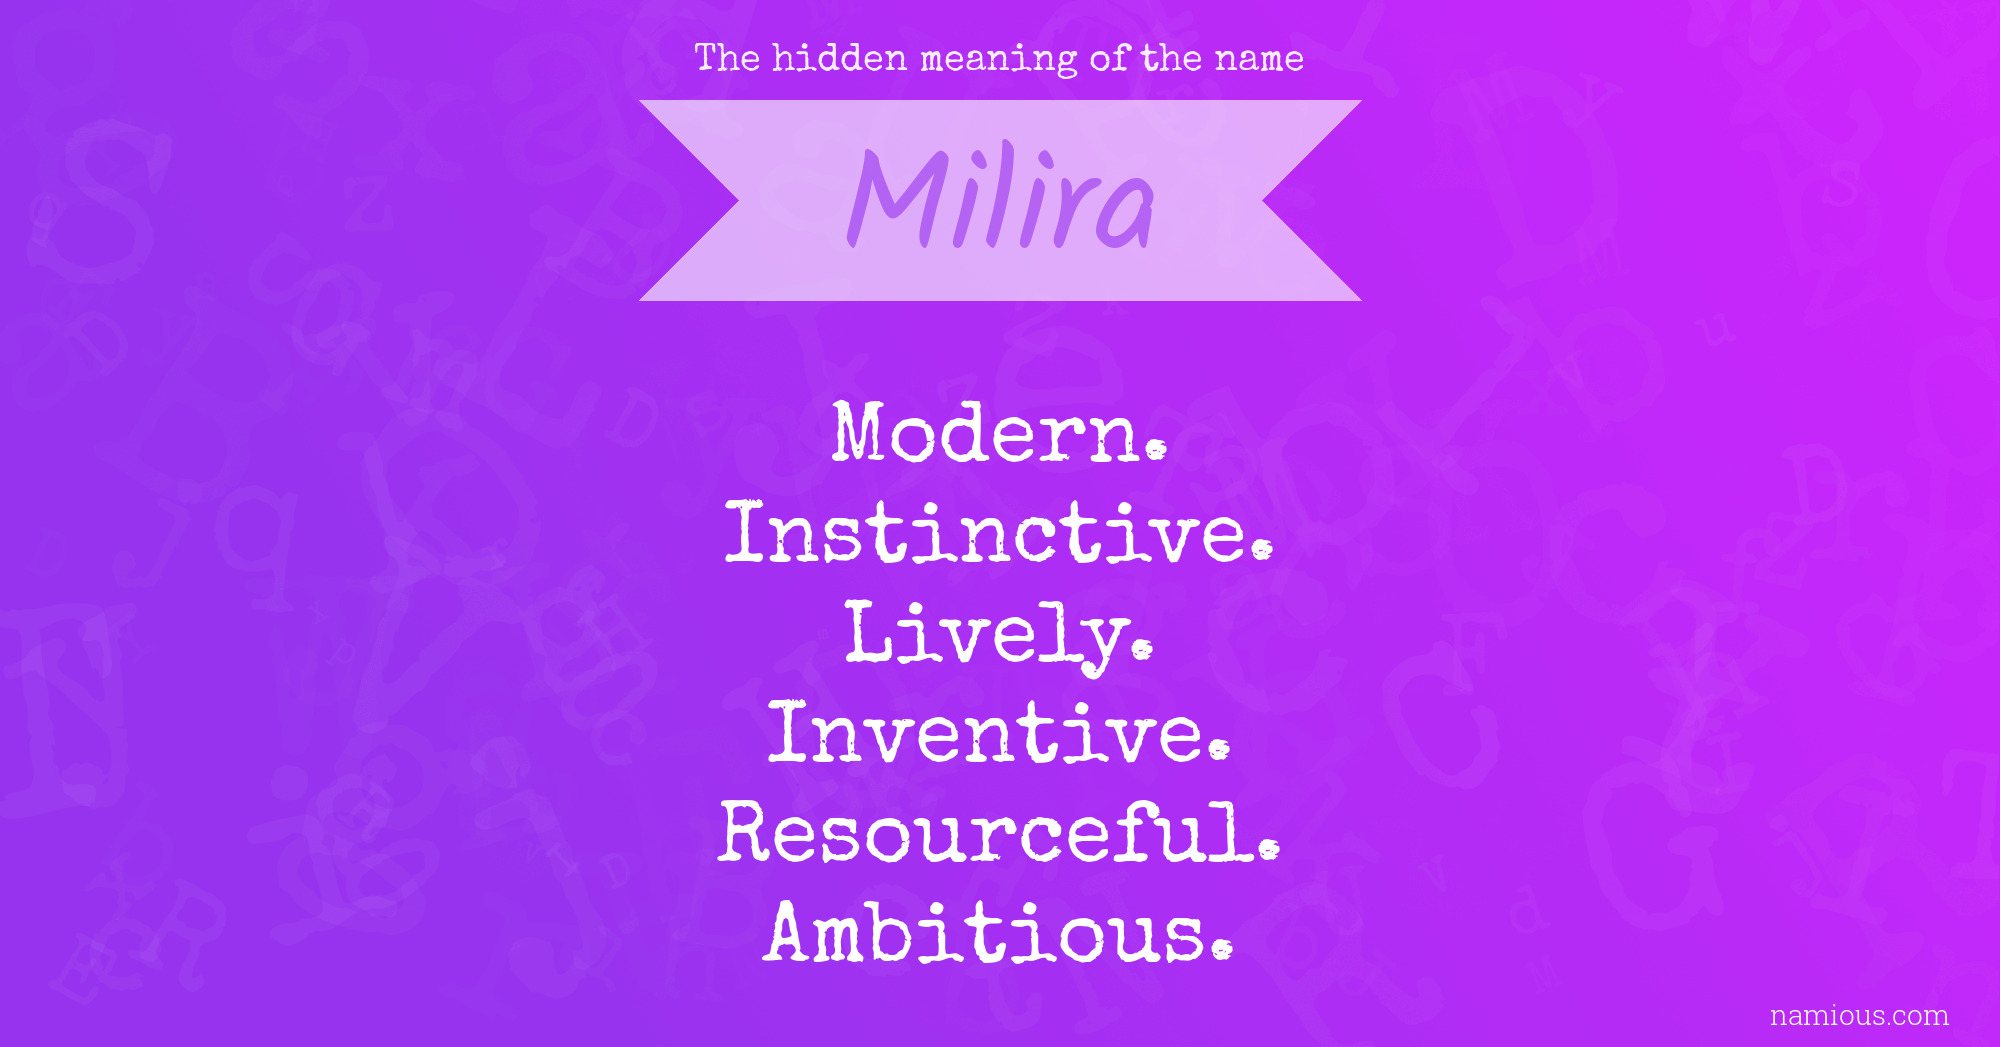 The hidden meaning of the name Milira